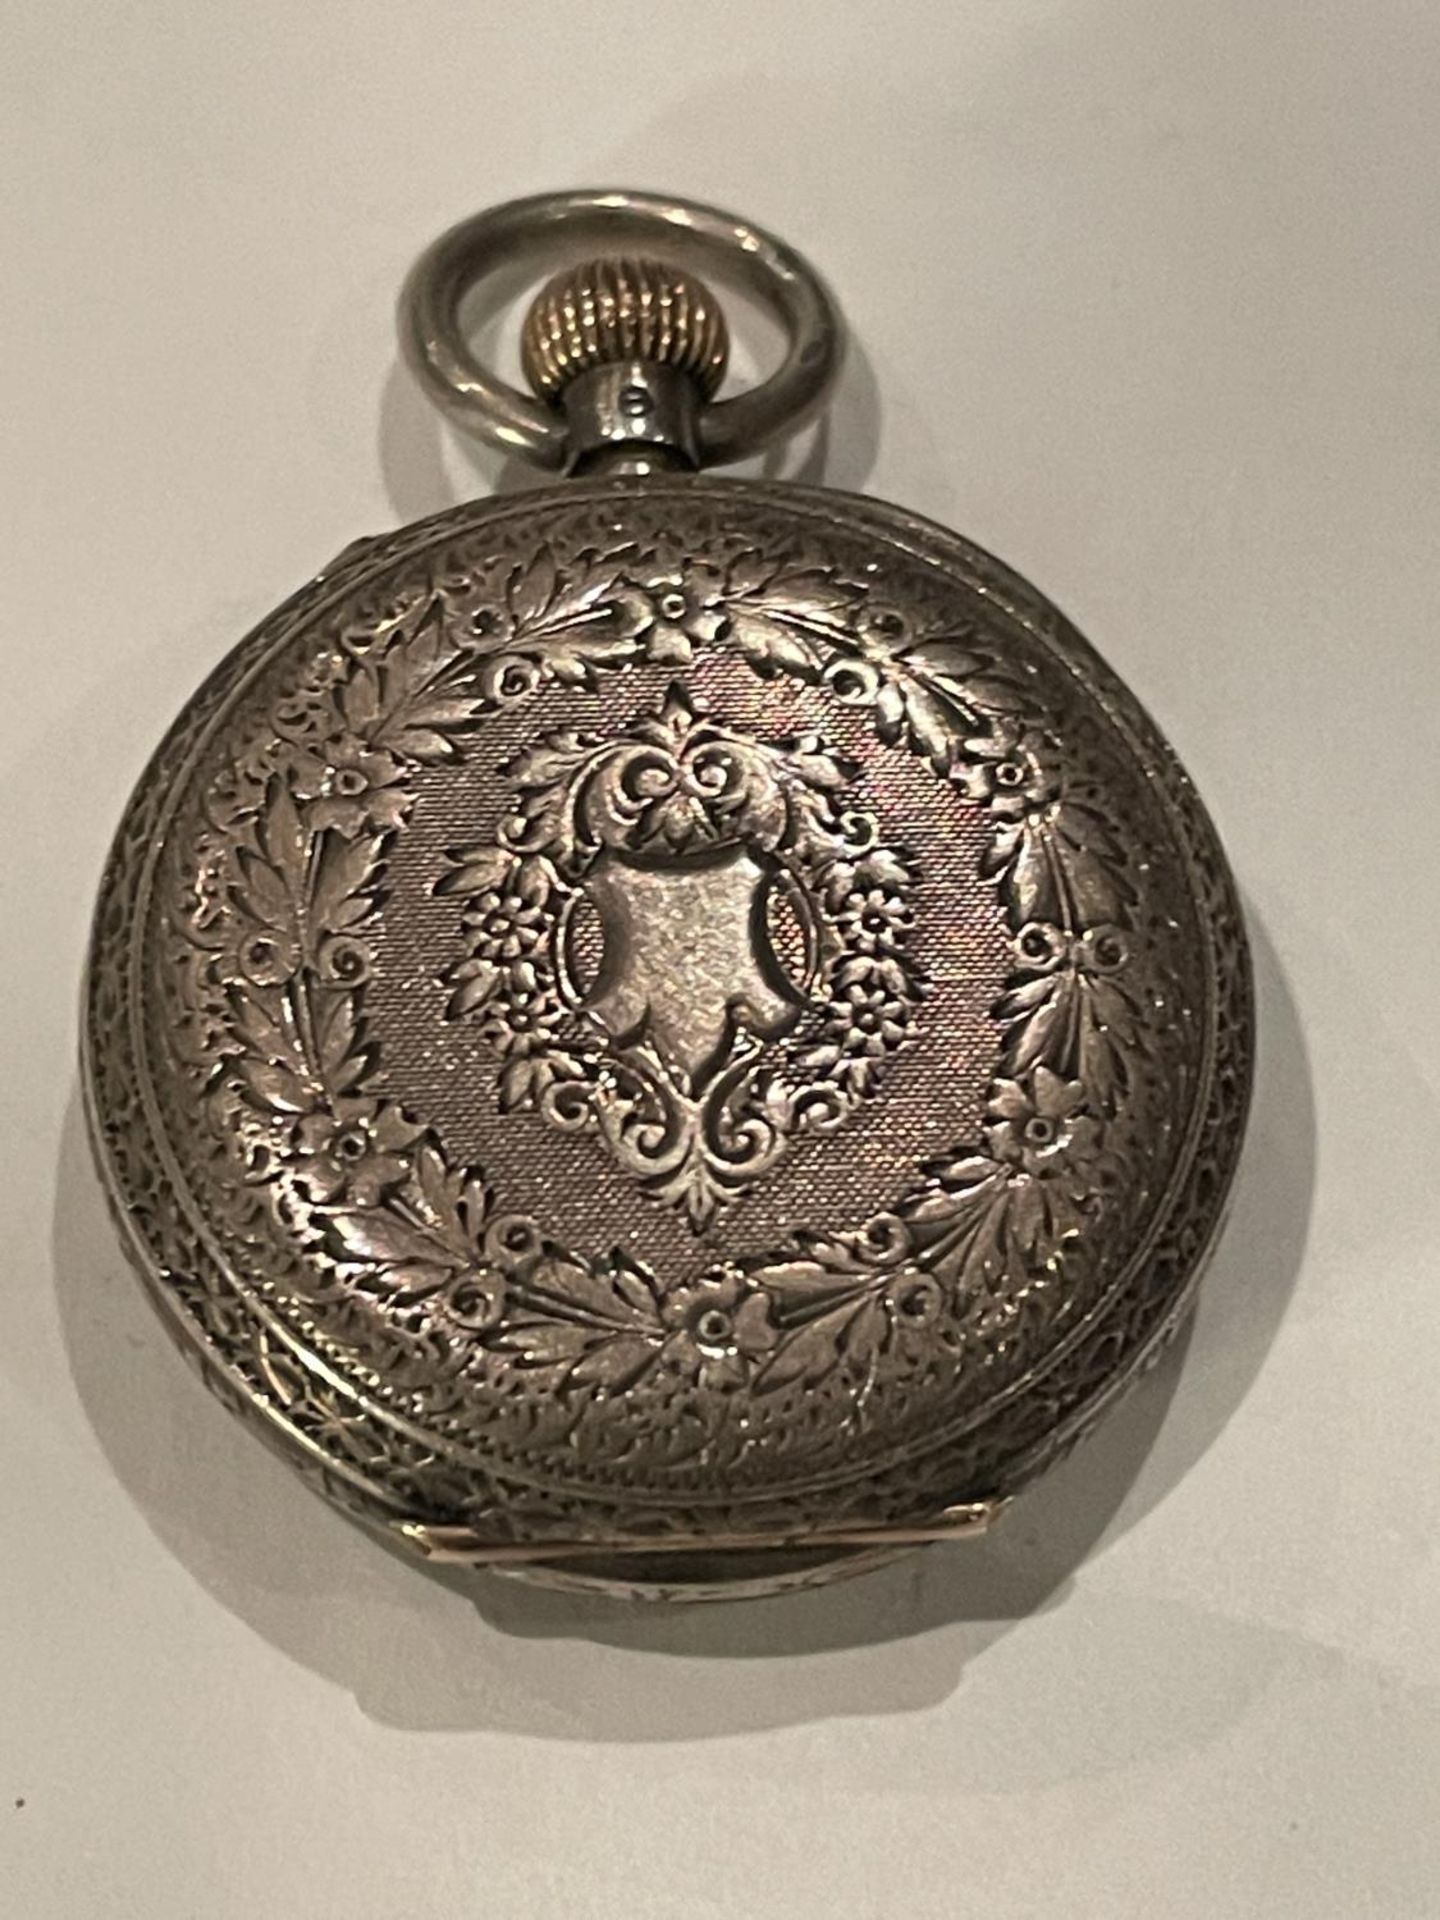 A MARKED 935 SILVER POCKET WATCH - Image 2 of 3